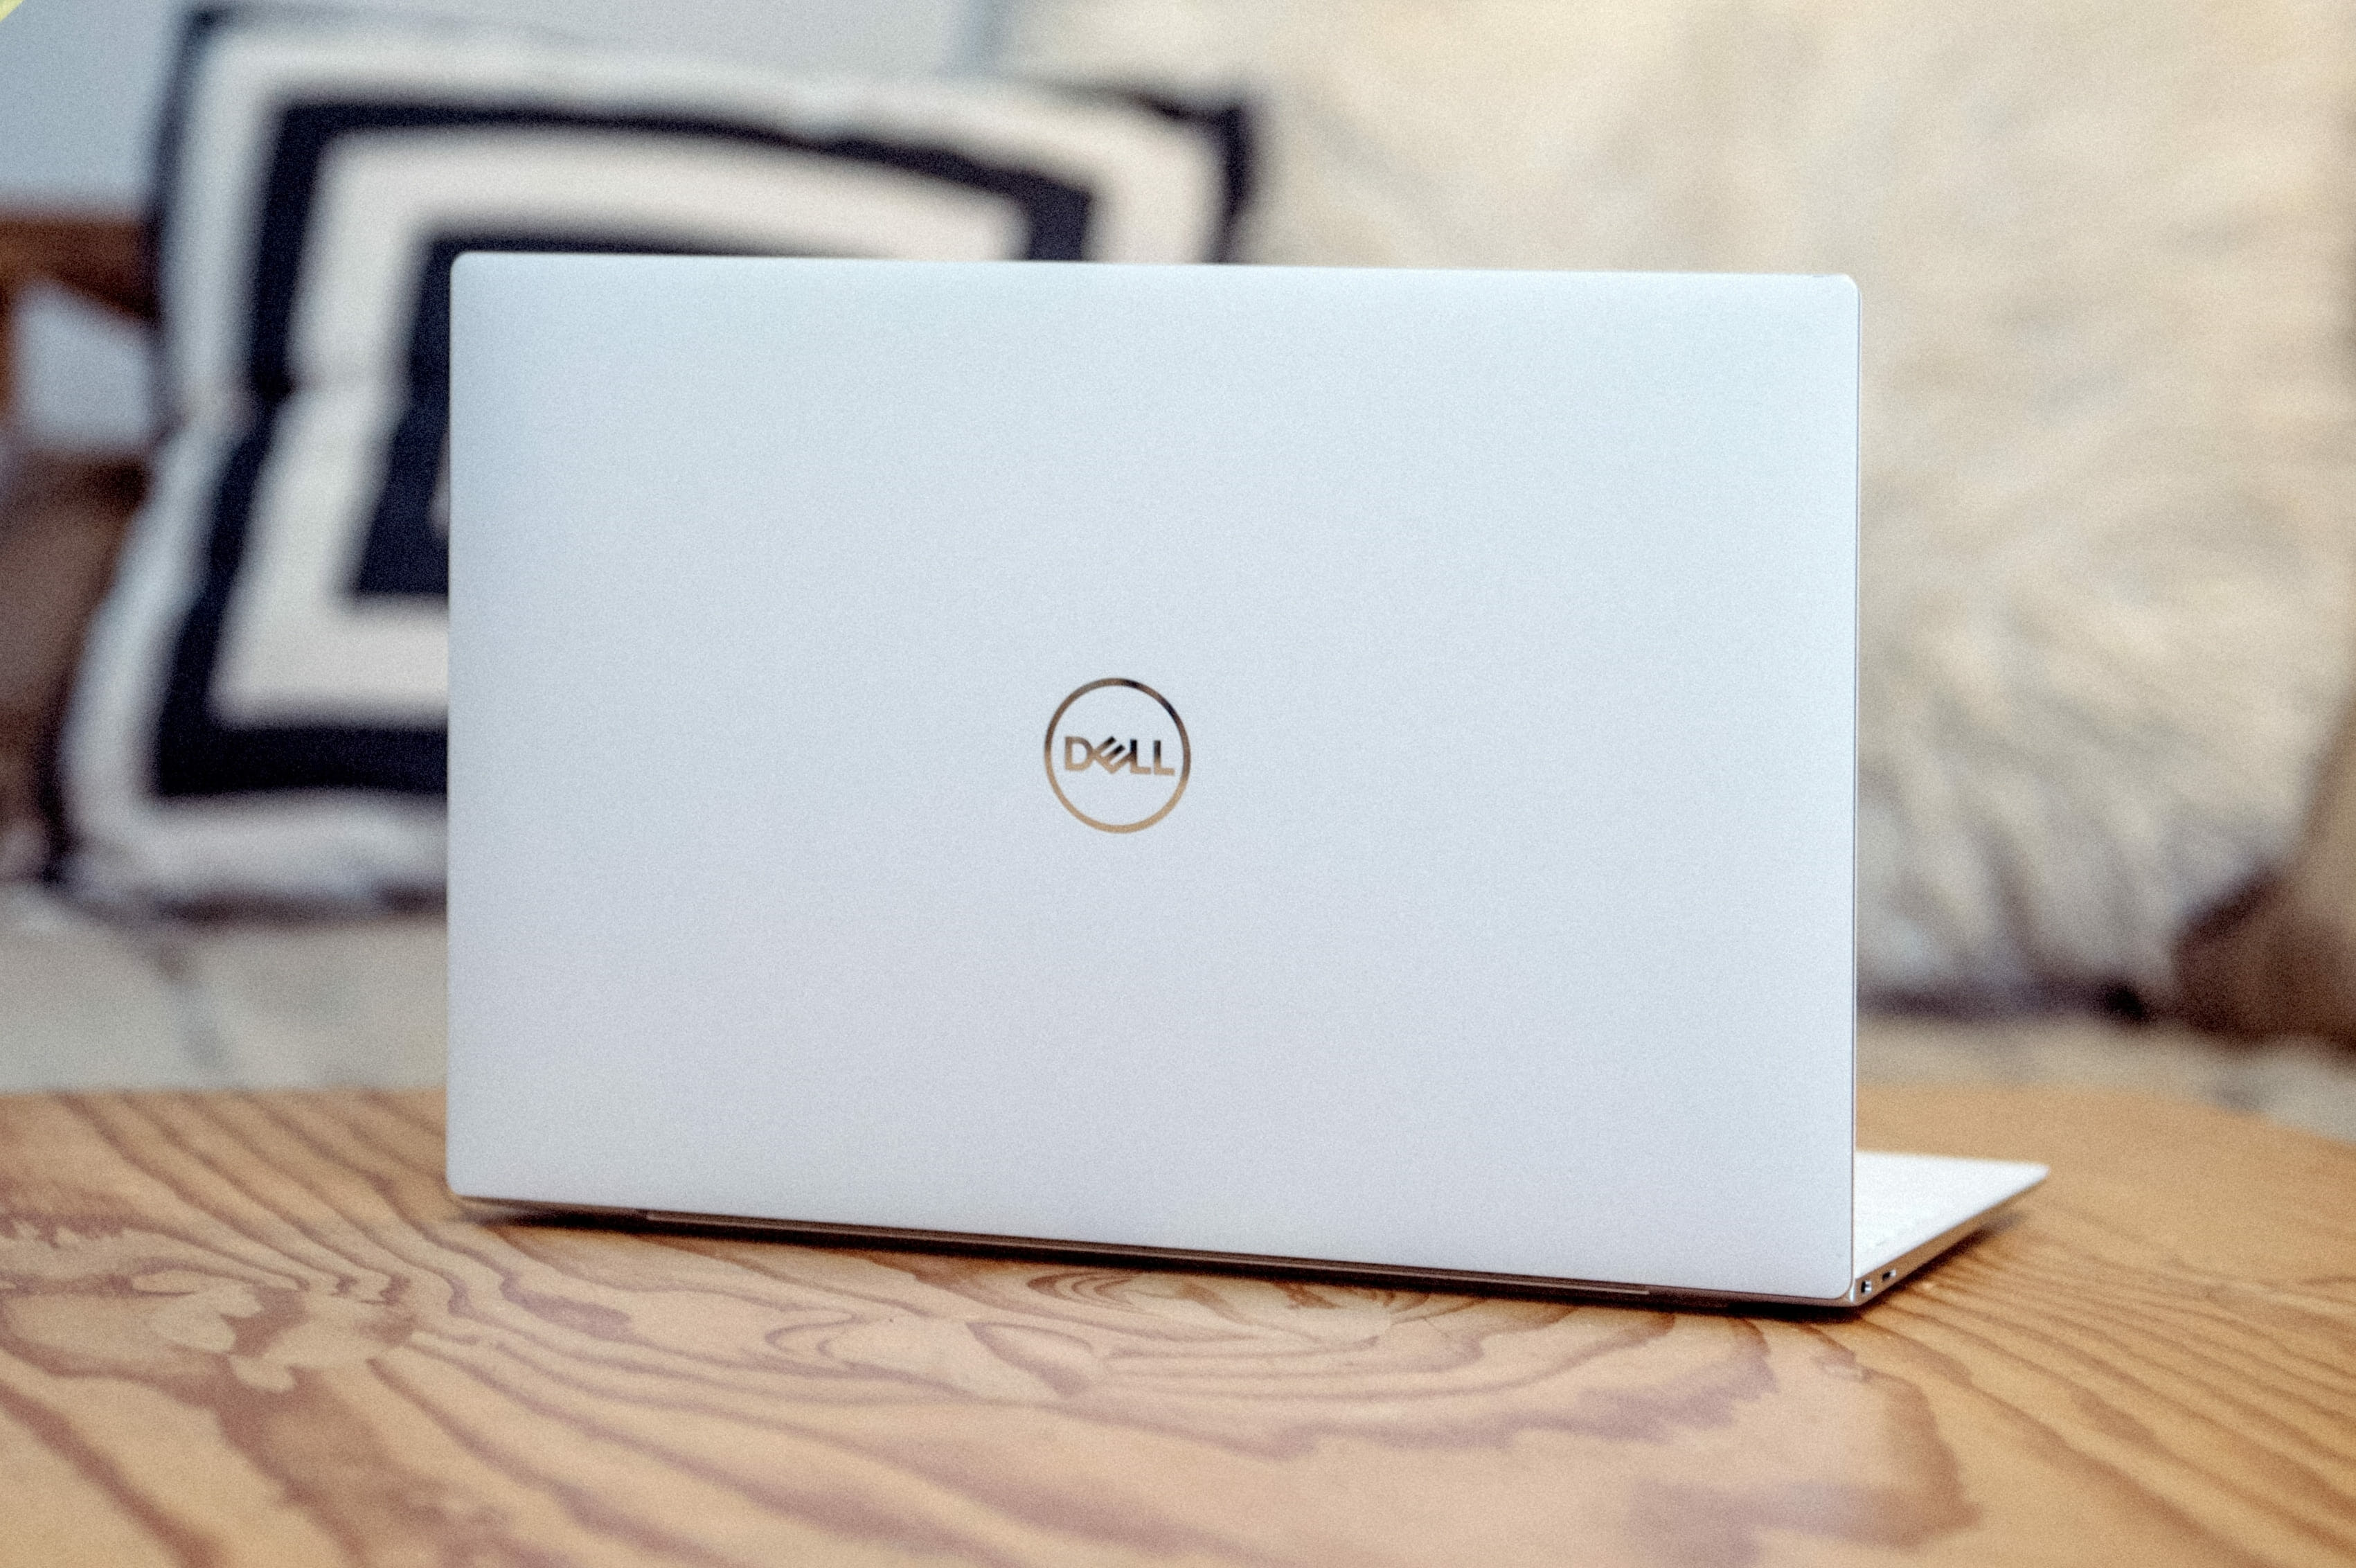 Dell XPS 15 Not Connecting to Wi-Fi? Here's What To Do